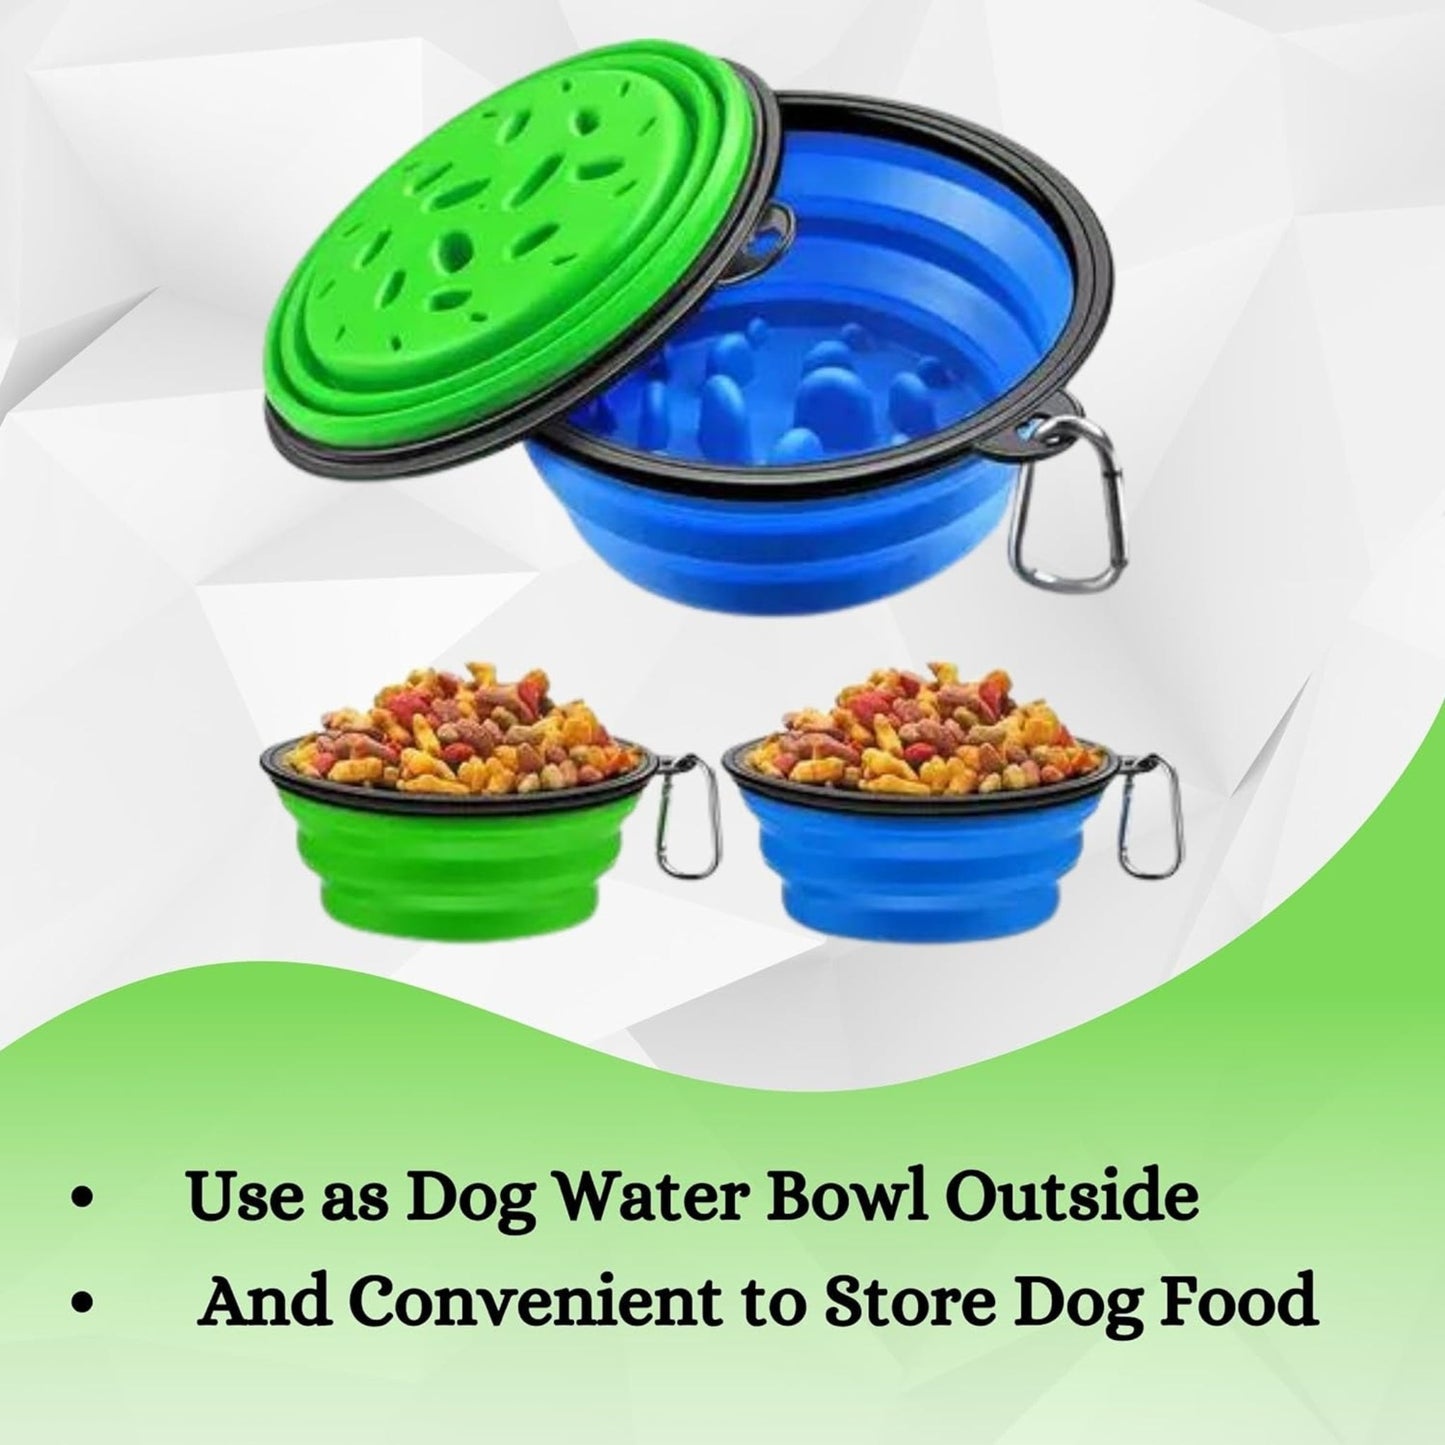 Foodie Puppies Foldable Silicone Sluggish Pet Bowl - 350ml, Pack of 2